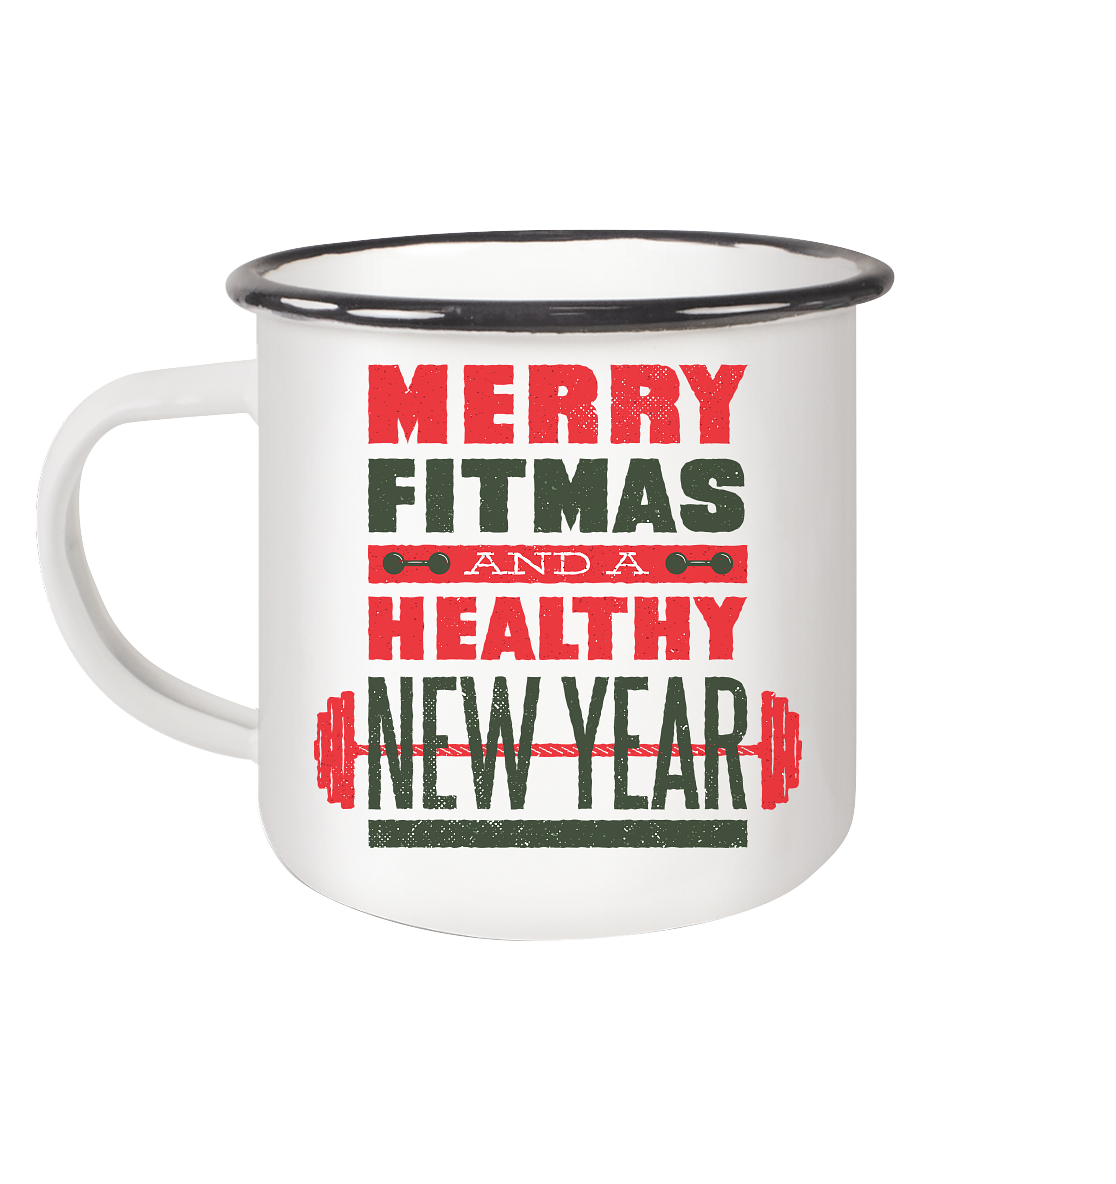 Weihnachtliches Design, Gym, Merry Fitmas and a Healthy New Year - Emaille Tasse (Black)